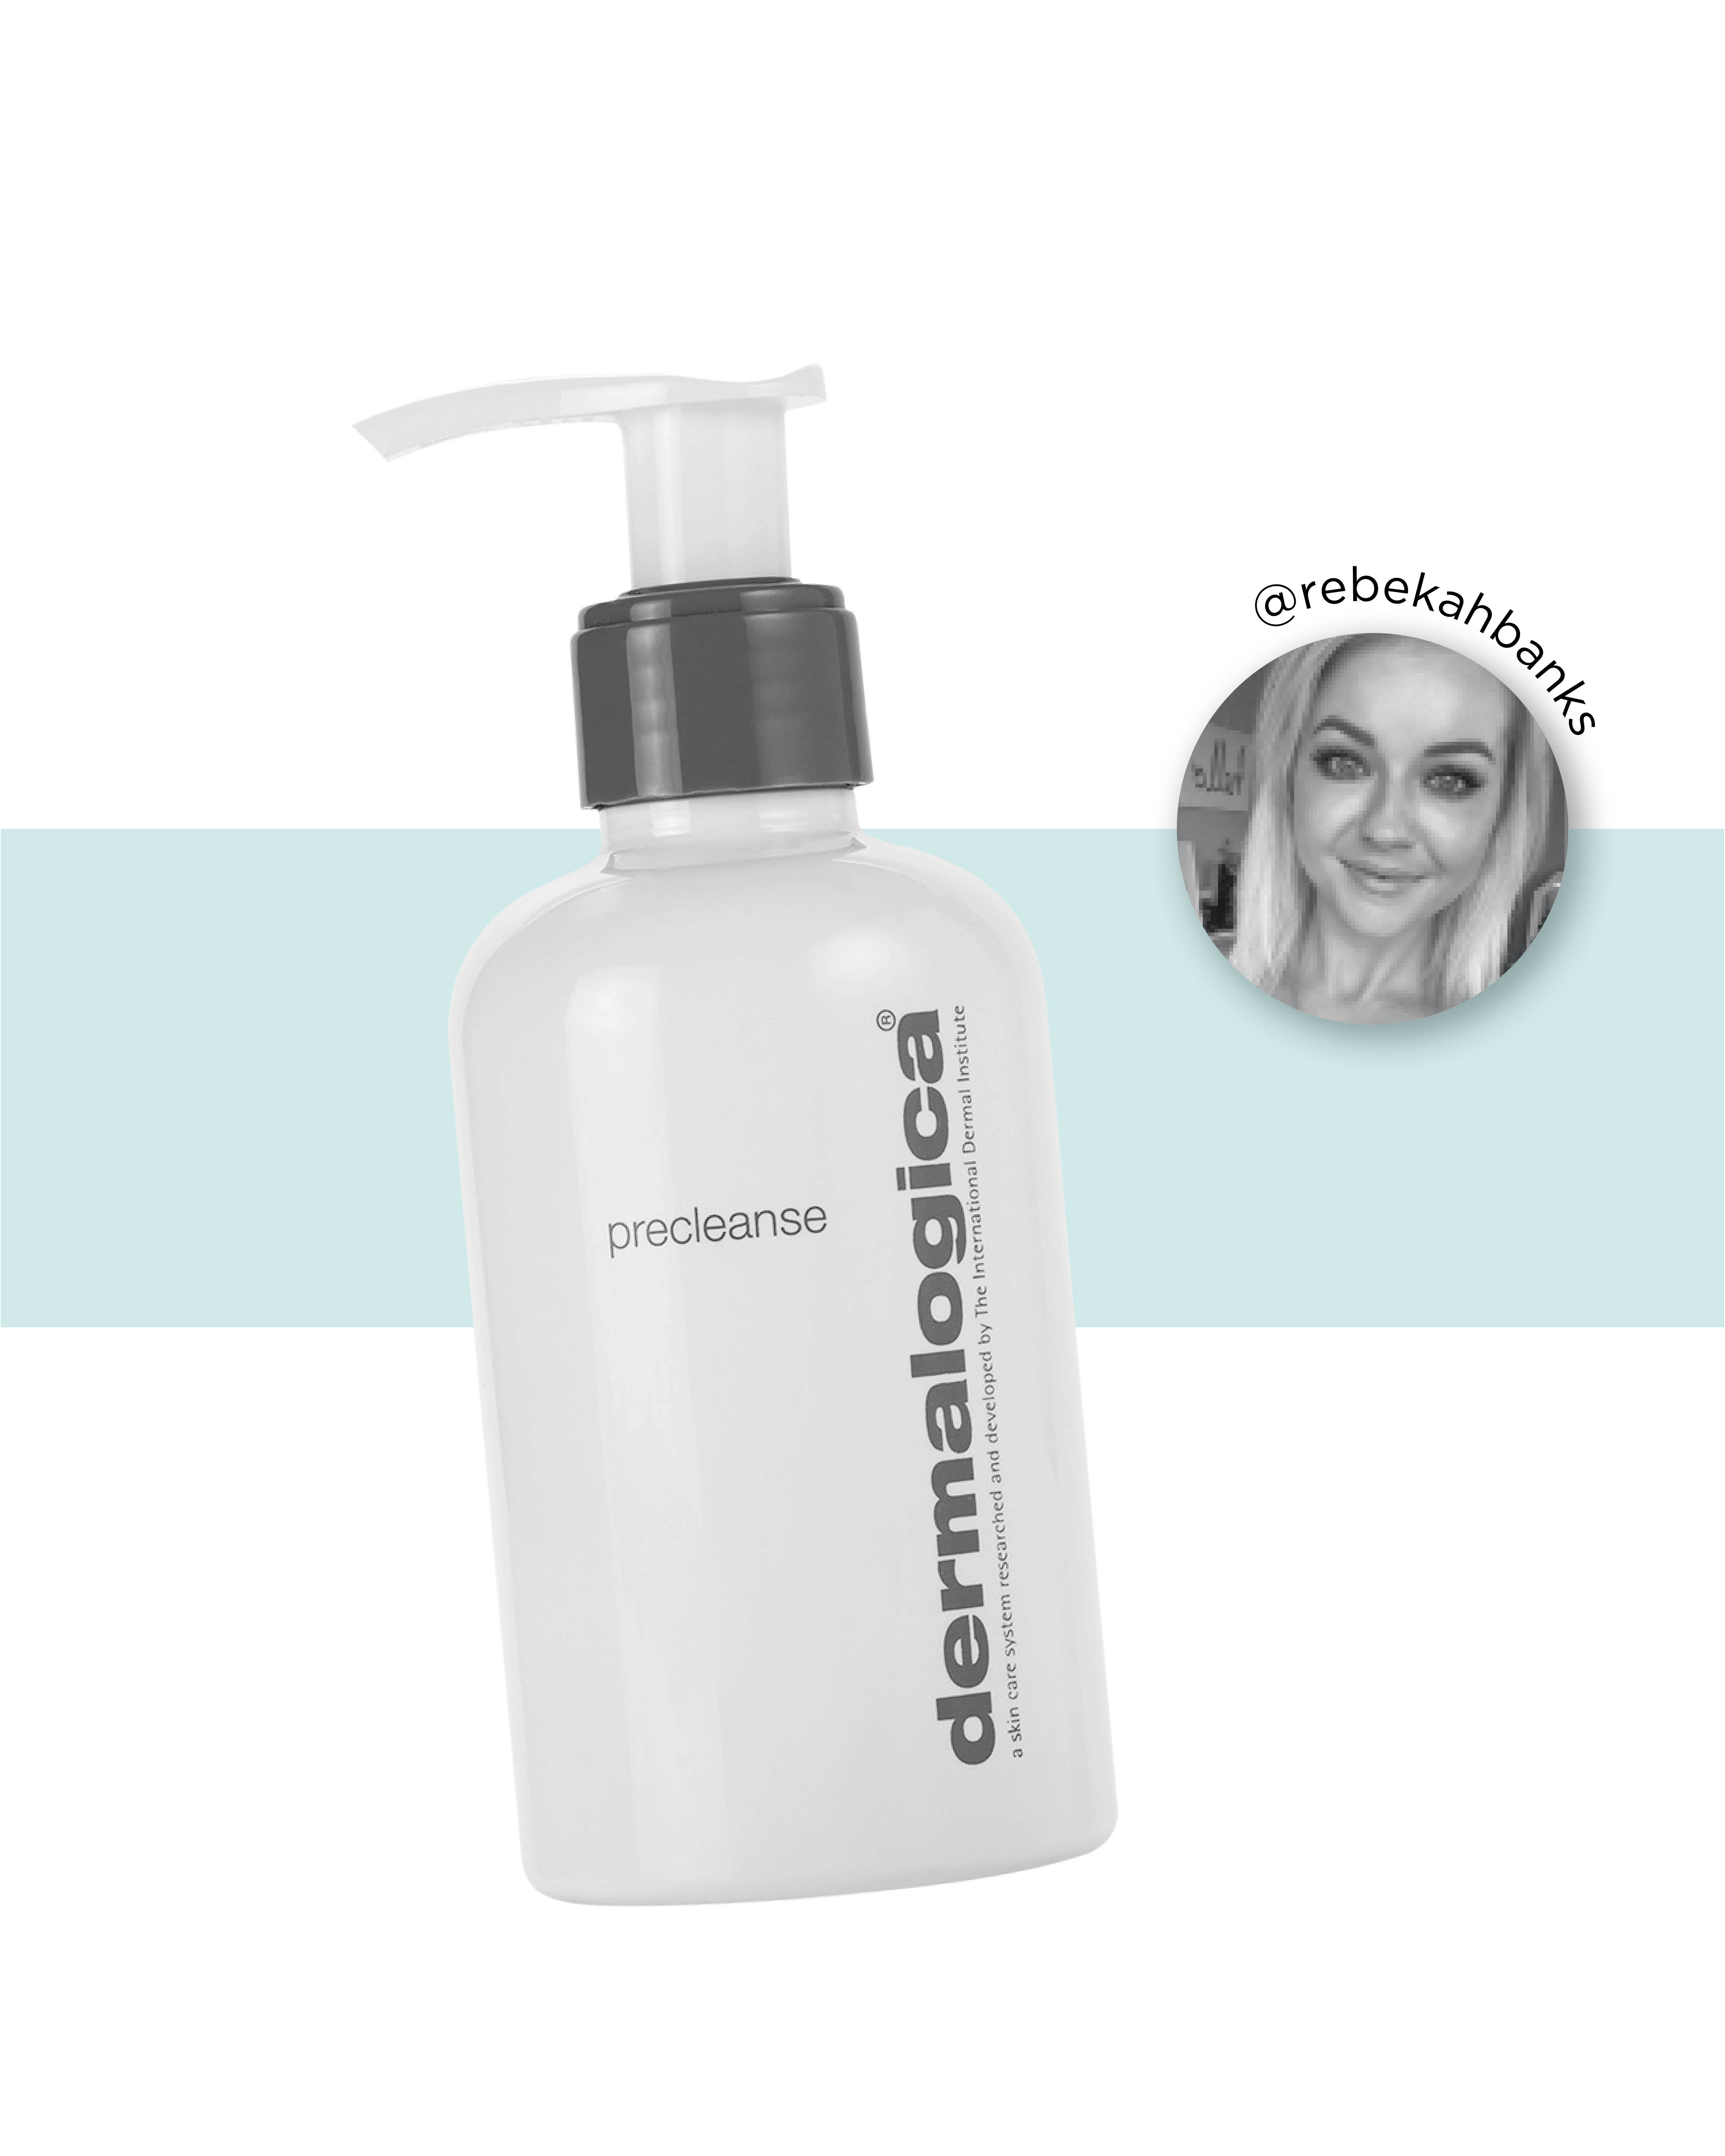 Dermalogica Precleanse, $69. It removes every single trace of your makeup, even waterproof mascaras and lipsticks. It’s the most gentle cleanser I’ve used and is suitable for all skin types and conditions.